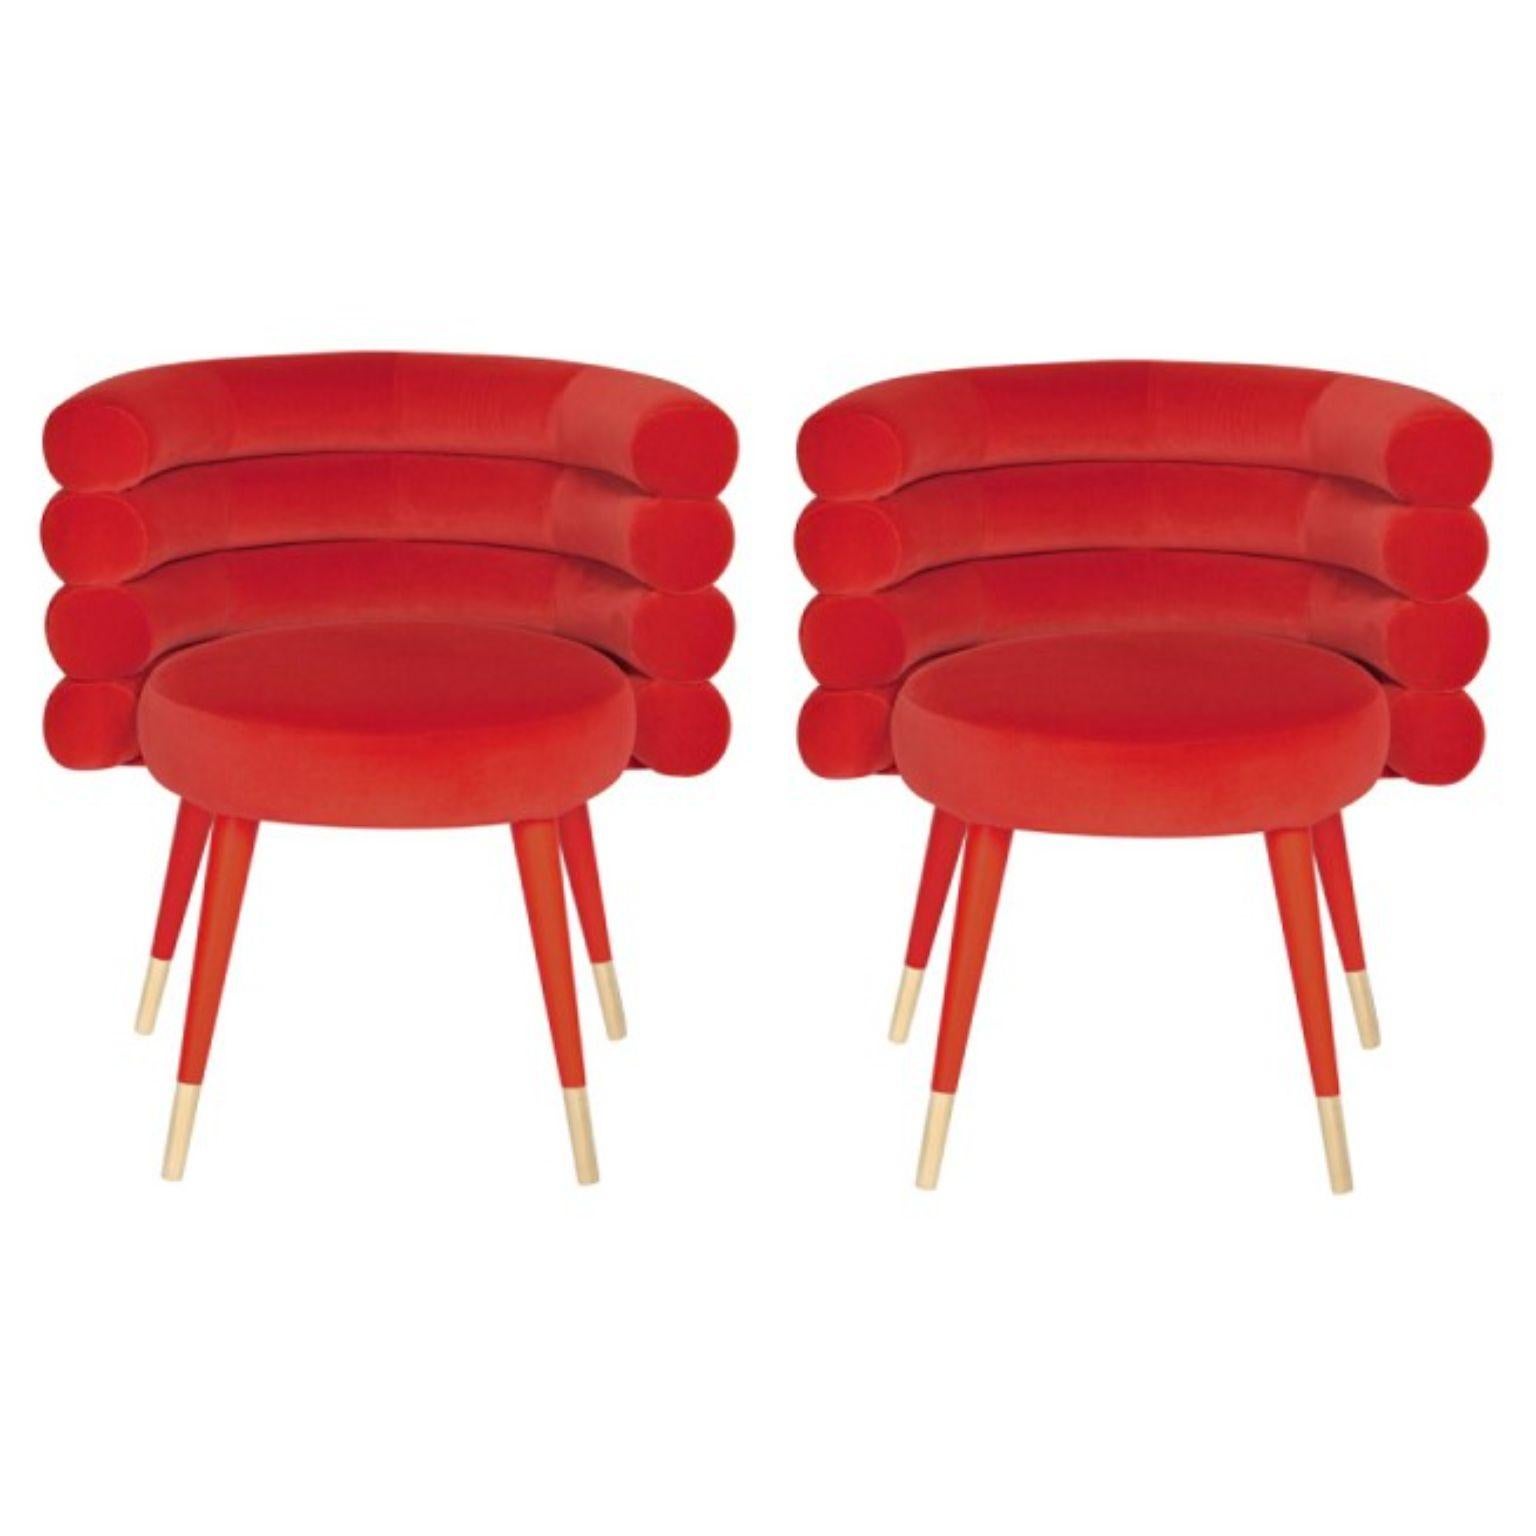 Set of 2 red Marshmallow dining chairs by Royal Stranger
Dimensions: 71 x 61 x H 74 cm. Seat height: 52 cm seat depth: 48 cm.
Materials: Velvet upholstery and brass.
Available in: Mint green, light pink, royal green, and royal red.

Royal